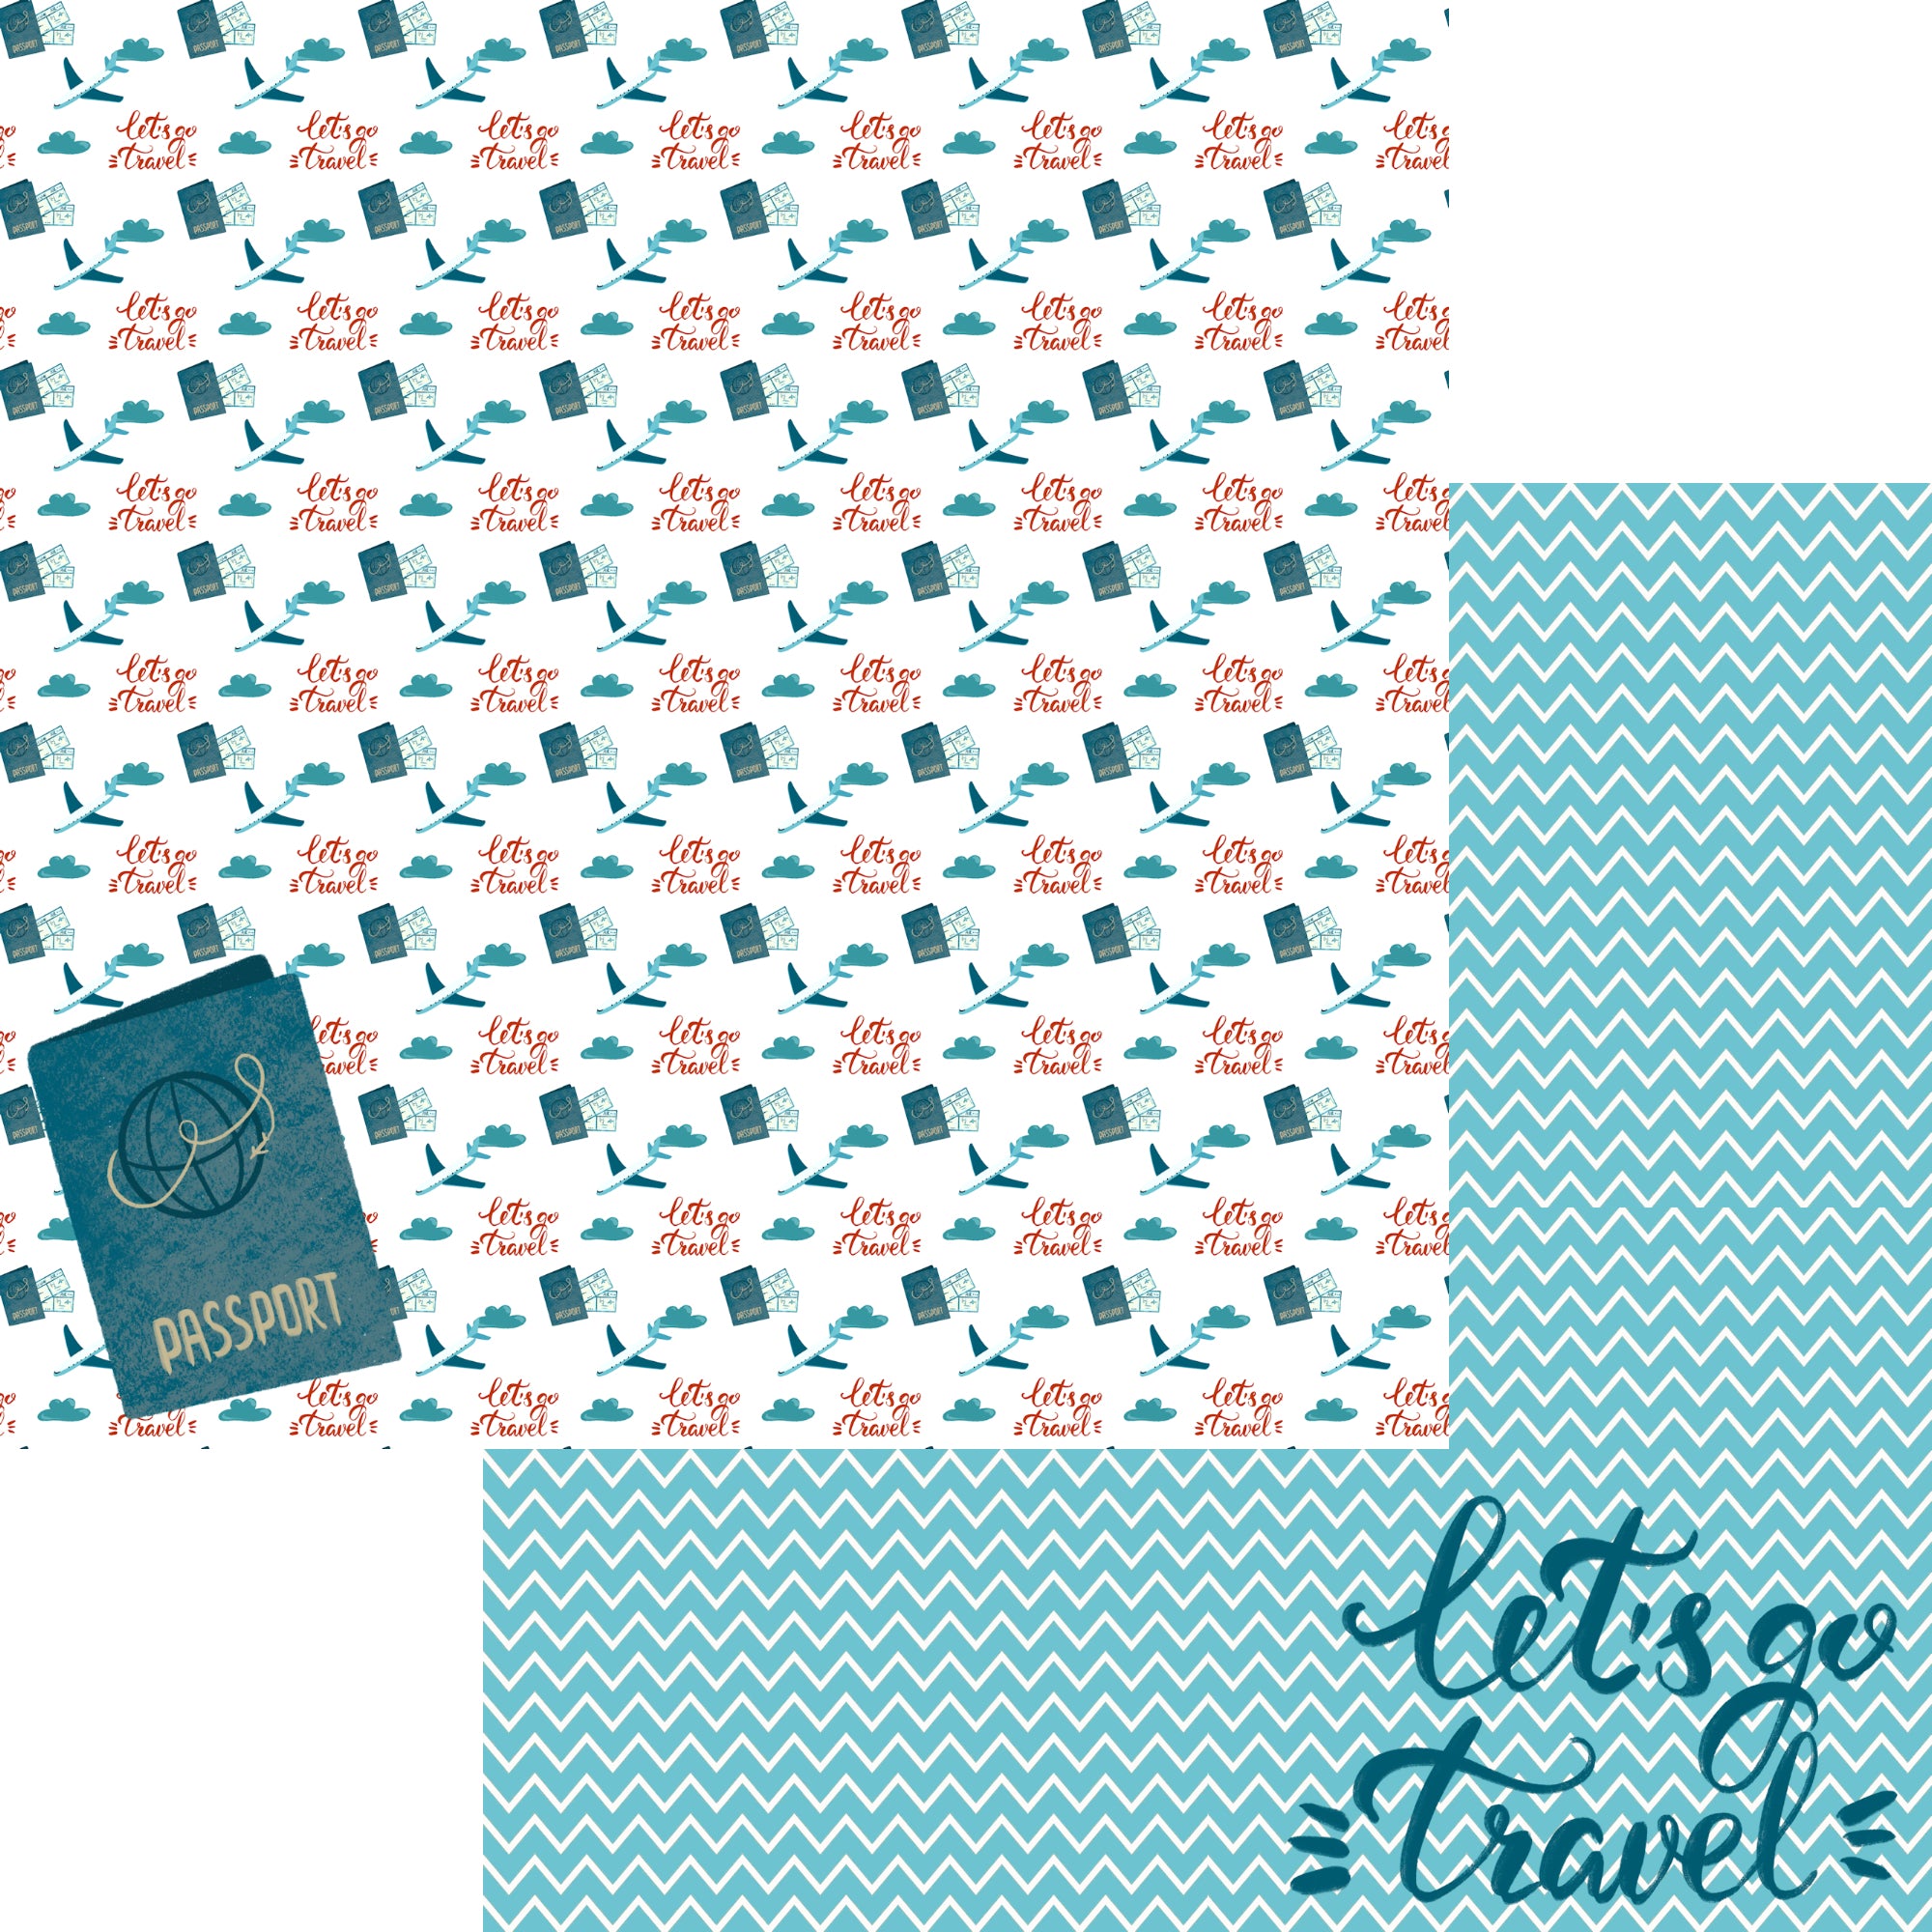 Let's Go Traveling Collection Let's Go Traveling 12 x 12 Double-Sided Scrapbook Paper by SSC Designs